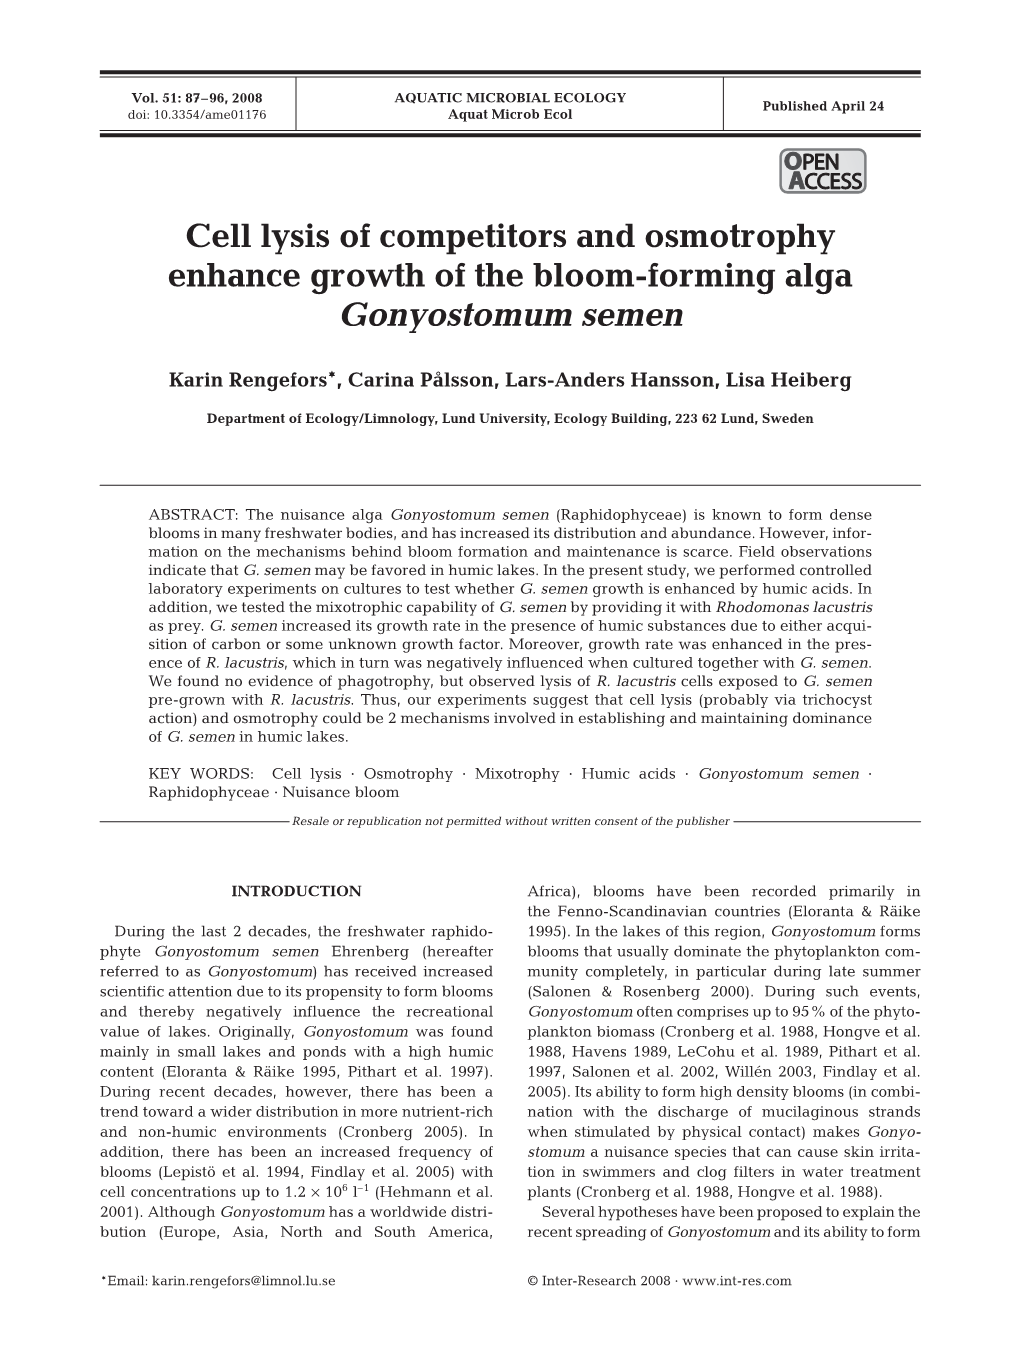 Cell Lysis of Competitors and Osmotrophy Enhance Growth of the Bloom-Forming Alga Gonyostomum Semen